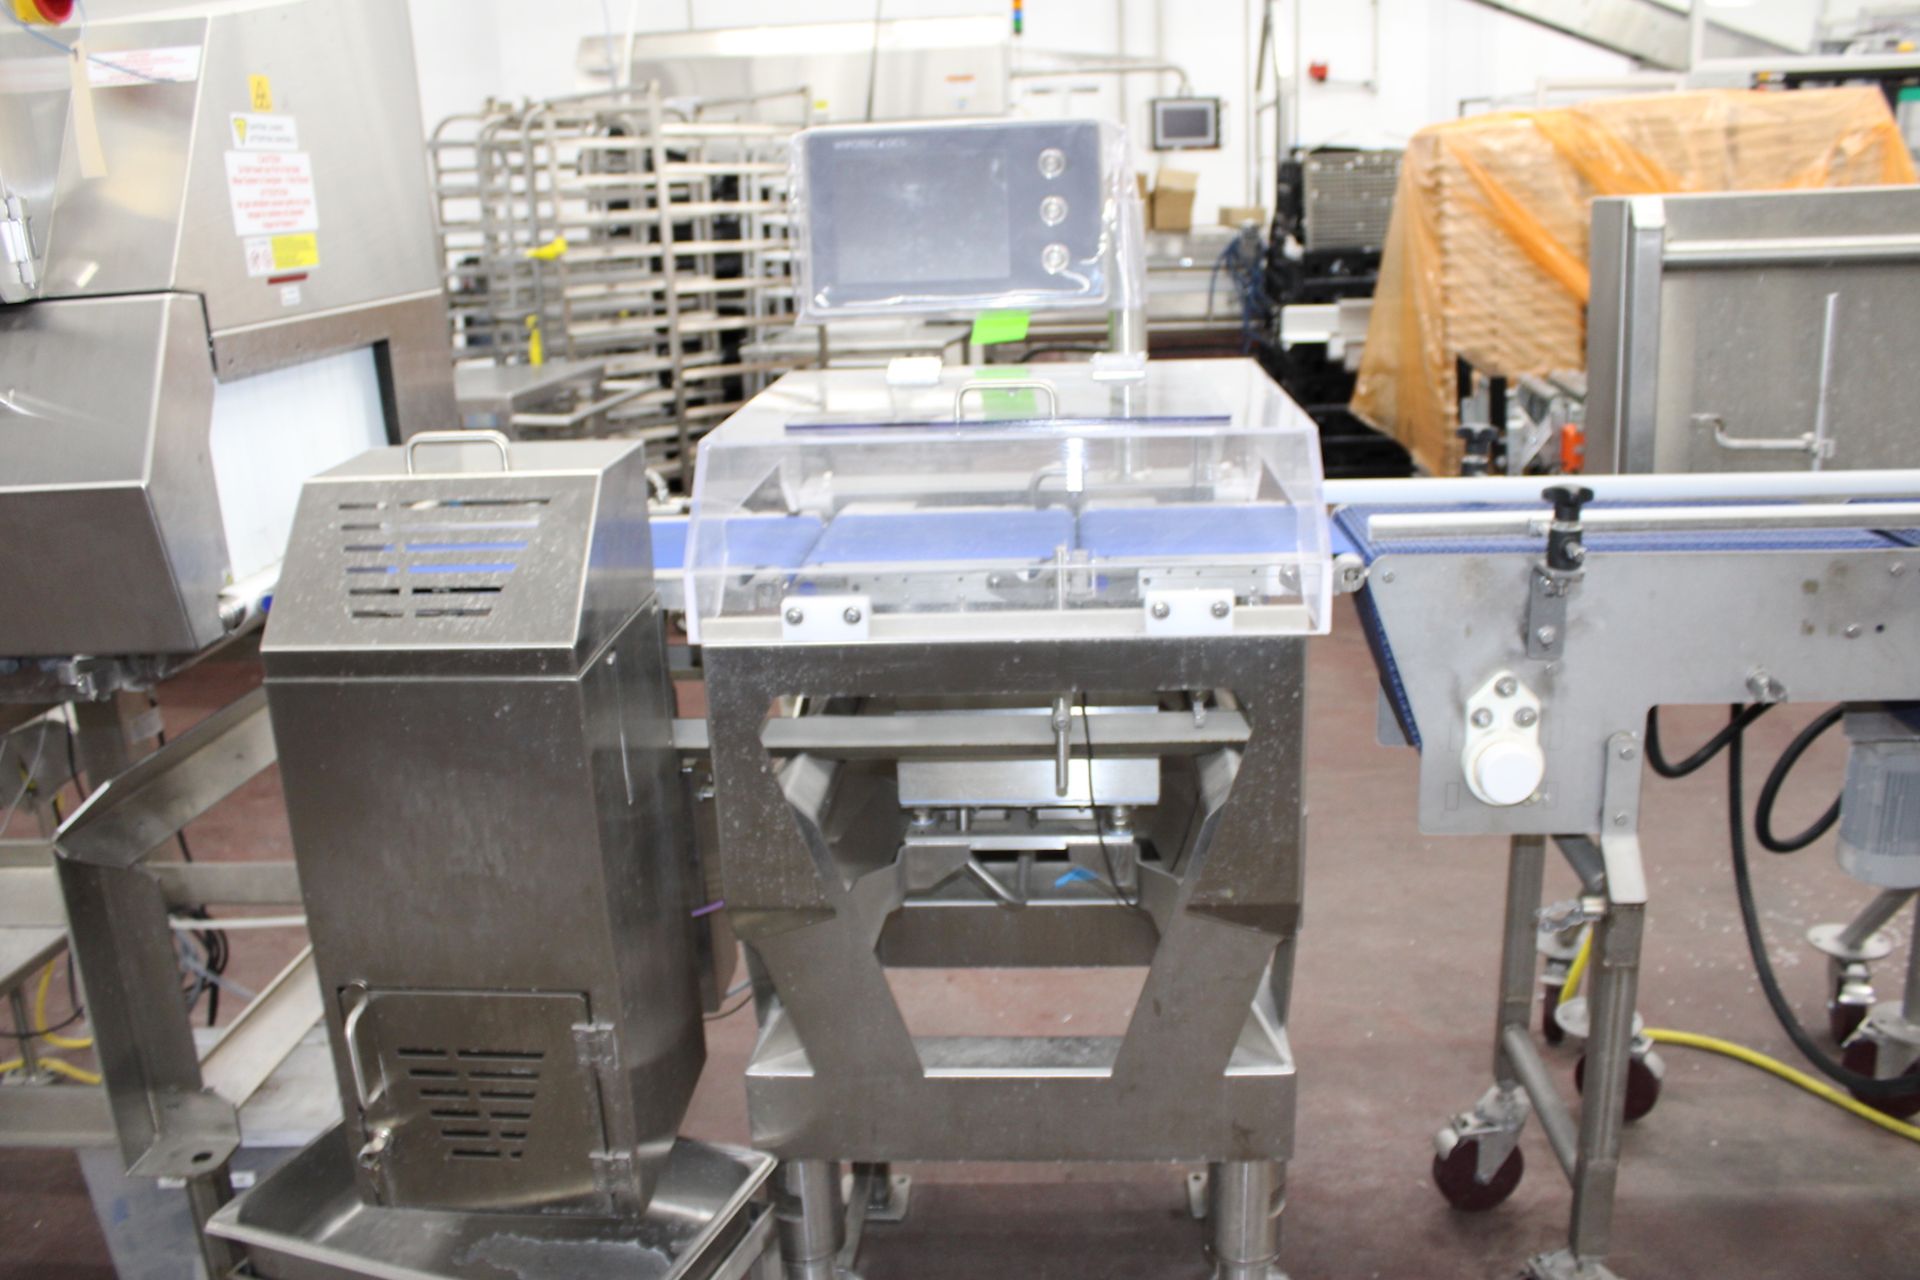 2022 WIPOTEC CHECKWEIGHER, MODEL 71201451, TYPE HC-M, S/N 1201451, WITH PRODUCT REJECT STATION